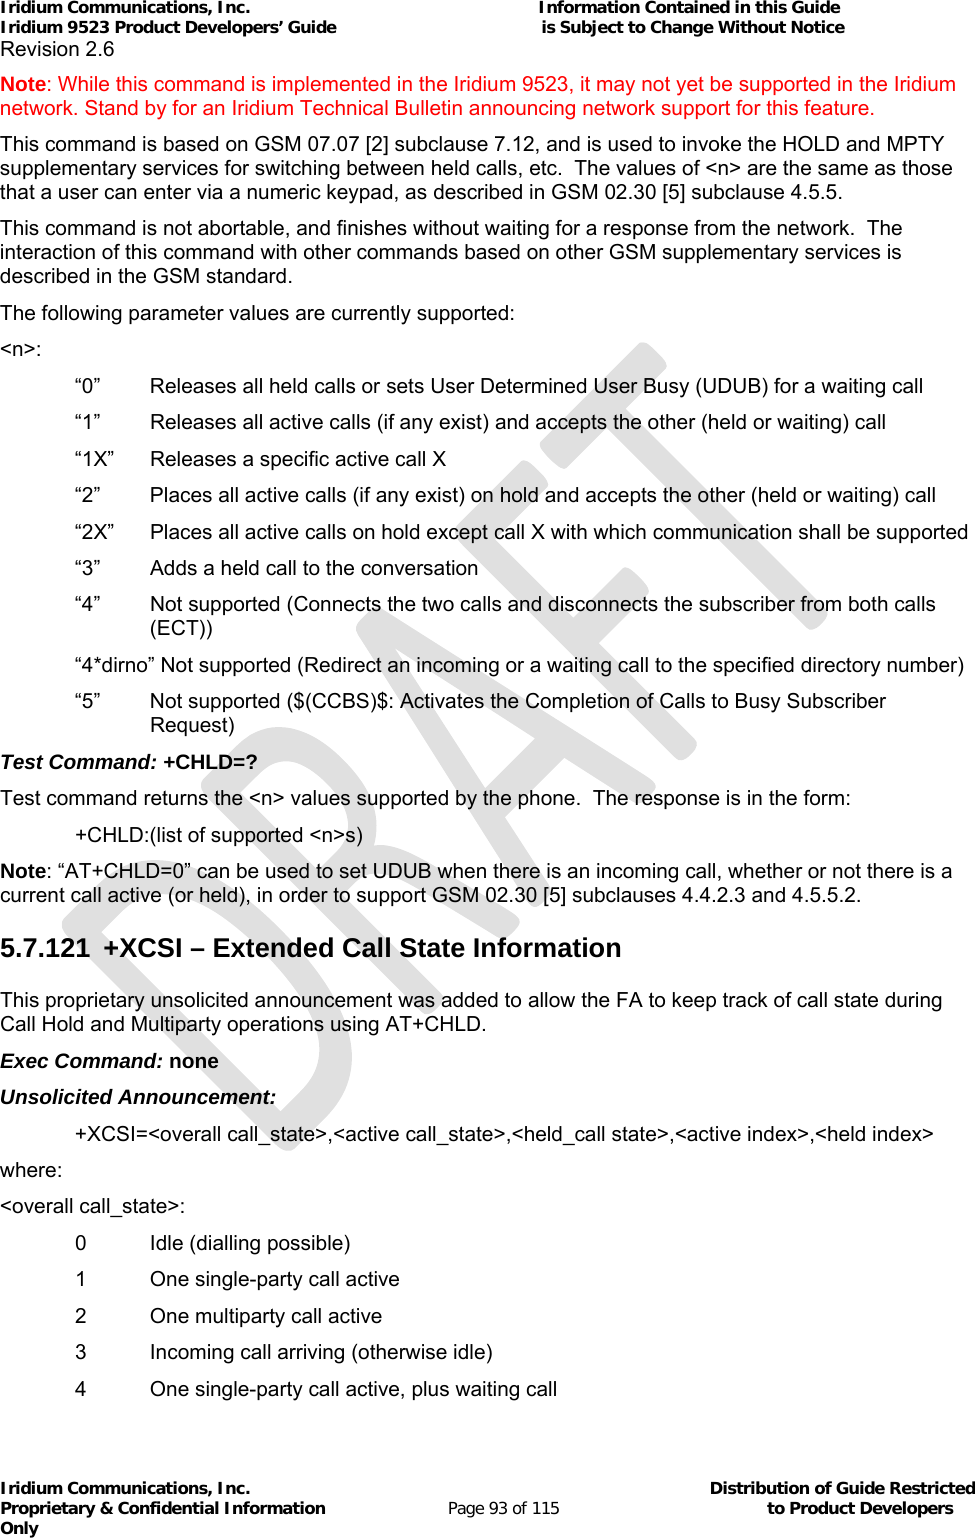 Iridium Communications, Inc.                                                           Information Contained in this Guide  Iridium 9523 Product Developers’ Guide                                          is Subject to Change Without Notice  Revision 2.6 Iridium Communications, Inc.                                          Distribution of Guide Restricted Proprietary &amp; Confidential Information                         Page 93 of 115                                        to Product Developers Only           Note: While this command is implemented in the Iridium 9523, it may not yet be supported in the Iridium network. Stand by for an Iridium Technical Bulletin announcing network support for this feature. This command is based on GSM 07.07 [2] subclause 7.12, and is used to invoke the HOLD and MPTY supplementary services for switching between held calls, etc.  The values of &lt;n&gt; are the same as those that a user can enter via a numeric keypad, as described in GSM 02.30 [5] subclause 4.5.5. This command is not abortable, and finishes without waiting for a response from the network.  The interaction of this command with other commands based on other GSM supplementary services is described in the GSM standard. The following parameter values are currently supported: &lt;n&gt;: “0”  Releases all held calls or sets User Determined User Busy (UDUB) for a waiting call “1”  Releases all active calls (if any exist) and accepts the other (held or waiting) call “1X”  Releases a specific active call X “2”  Places all active calls (if any exist) on hold and accepts the other (held or waiting) call “2X”  Places all active calls on hold except call X with which communication shall be supported “3”  Adds a held call to the conversation “4”  Not supported (Connects the two calls and disconnects the subscriber from both calls (ECT)) “4*dirno” Not supported (Redirect an incoming or a waiting call to the specified directory number) “5”  Not supported ($(CCBS)$: Activates the Completion of Calls to Busy Subscriber Request) Test Command: +CHLD=? Test command returns the &lt;n&gt; values supported by the phone.  The response is in the form:   +CHLD:(list of supported &lt;n&gt;s) Note: “AT+CHLD=0” can be used to set UDUB when there is an incoming call, whether or not there is a current call active (or held), in order to support GSM 02.30 [5] subclauses 4.4.2.3 and 4.5.5.2. 5.7.121  +XCSI – Extended Call State Information This proprietary unsolicited announcement was added to allow the FA to keep track of call state during Call Hold and Multiparty operations using AT+CHLD. Exec Command: none Unsolicited Announcement: +XCSI=&lt;overall call_state&gt;,&lt;active call_state&gt;,&lt;held_call state&gt;,&lt;active index&gt;,&lt;held index&gt; where: &lt;overall call_state&gt;:   0  Idle (dialling possible)   1  One single-party call active   2  One multiparty call active   3  Incoming call arriving (otherwise idle)   4  One single-party call active, plus waiting call 